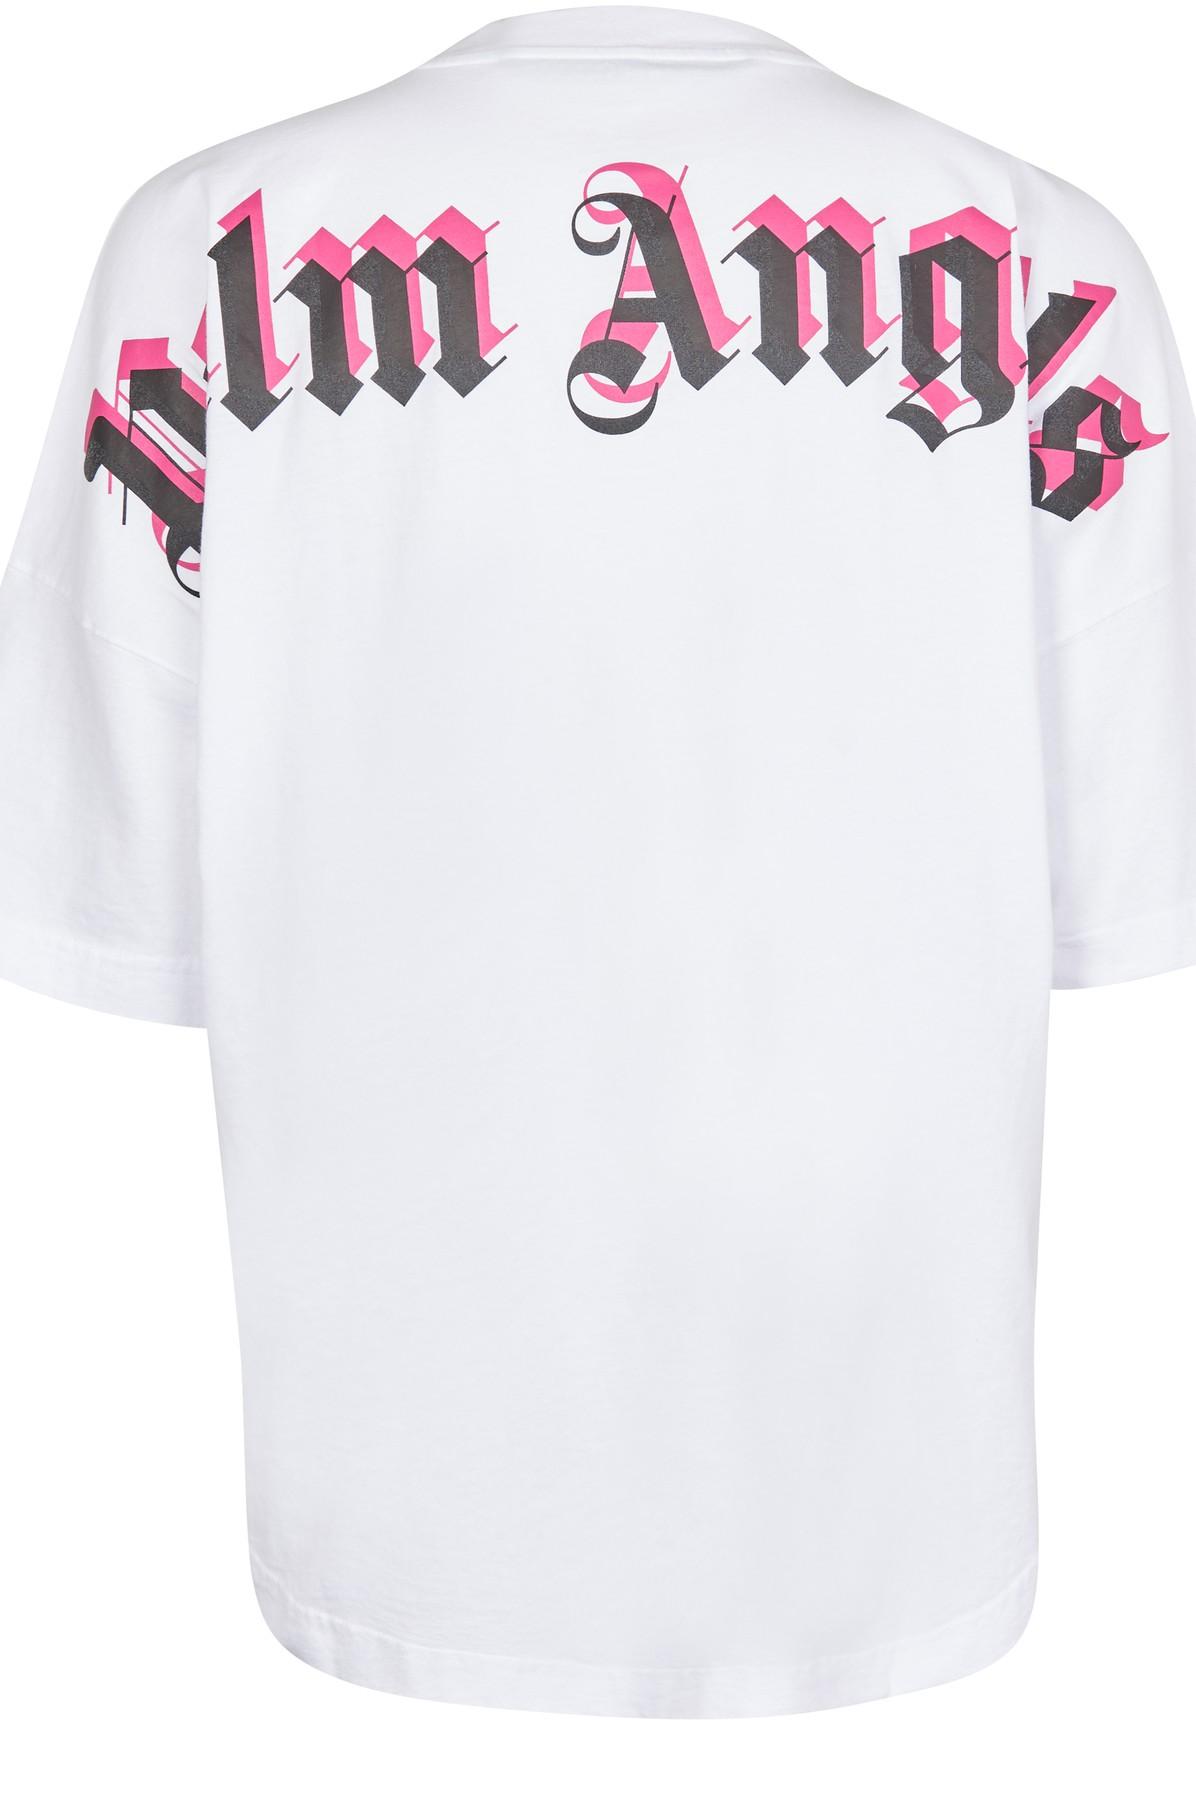 Palm Angels Double Logo T-shirt in White for Men | Lyst